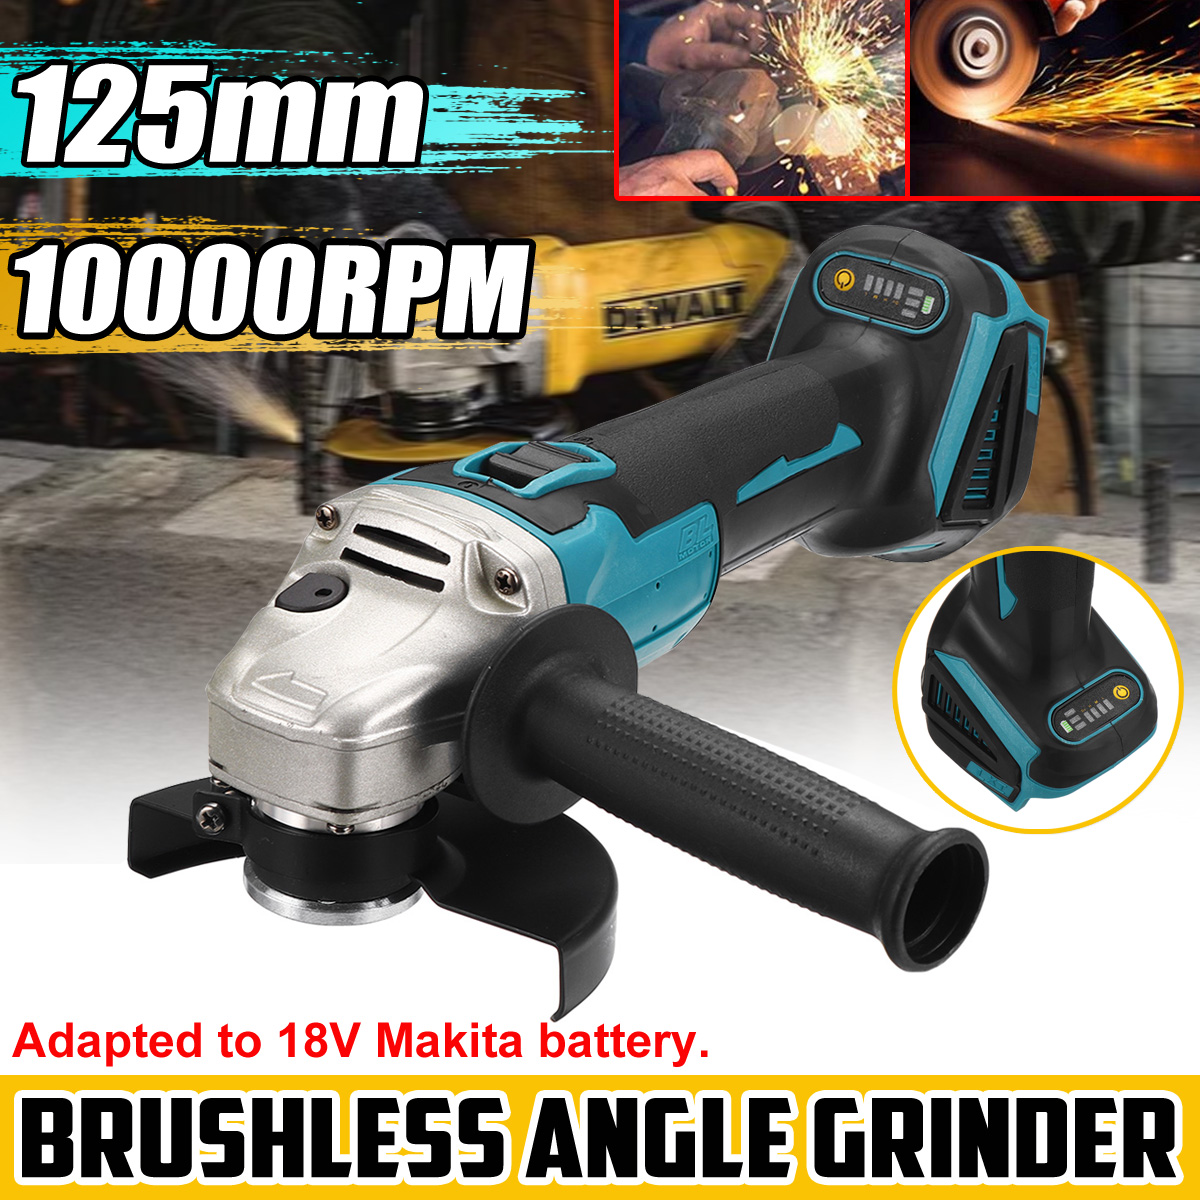 Drillpro-125mm-4-Speed-Regulated-Angle-Grinder-Rechargable-Li-ion-Battery-Brushless-Electric-Grinder-1699793-2